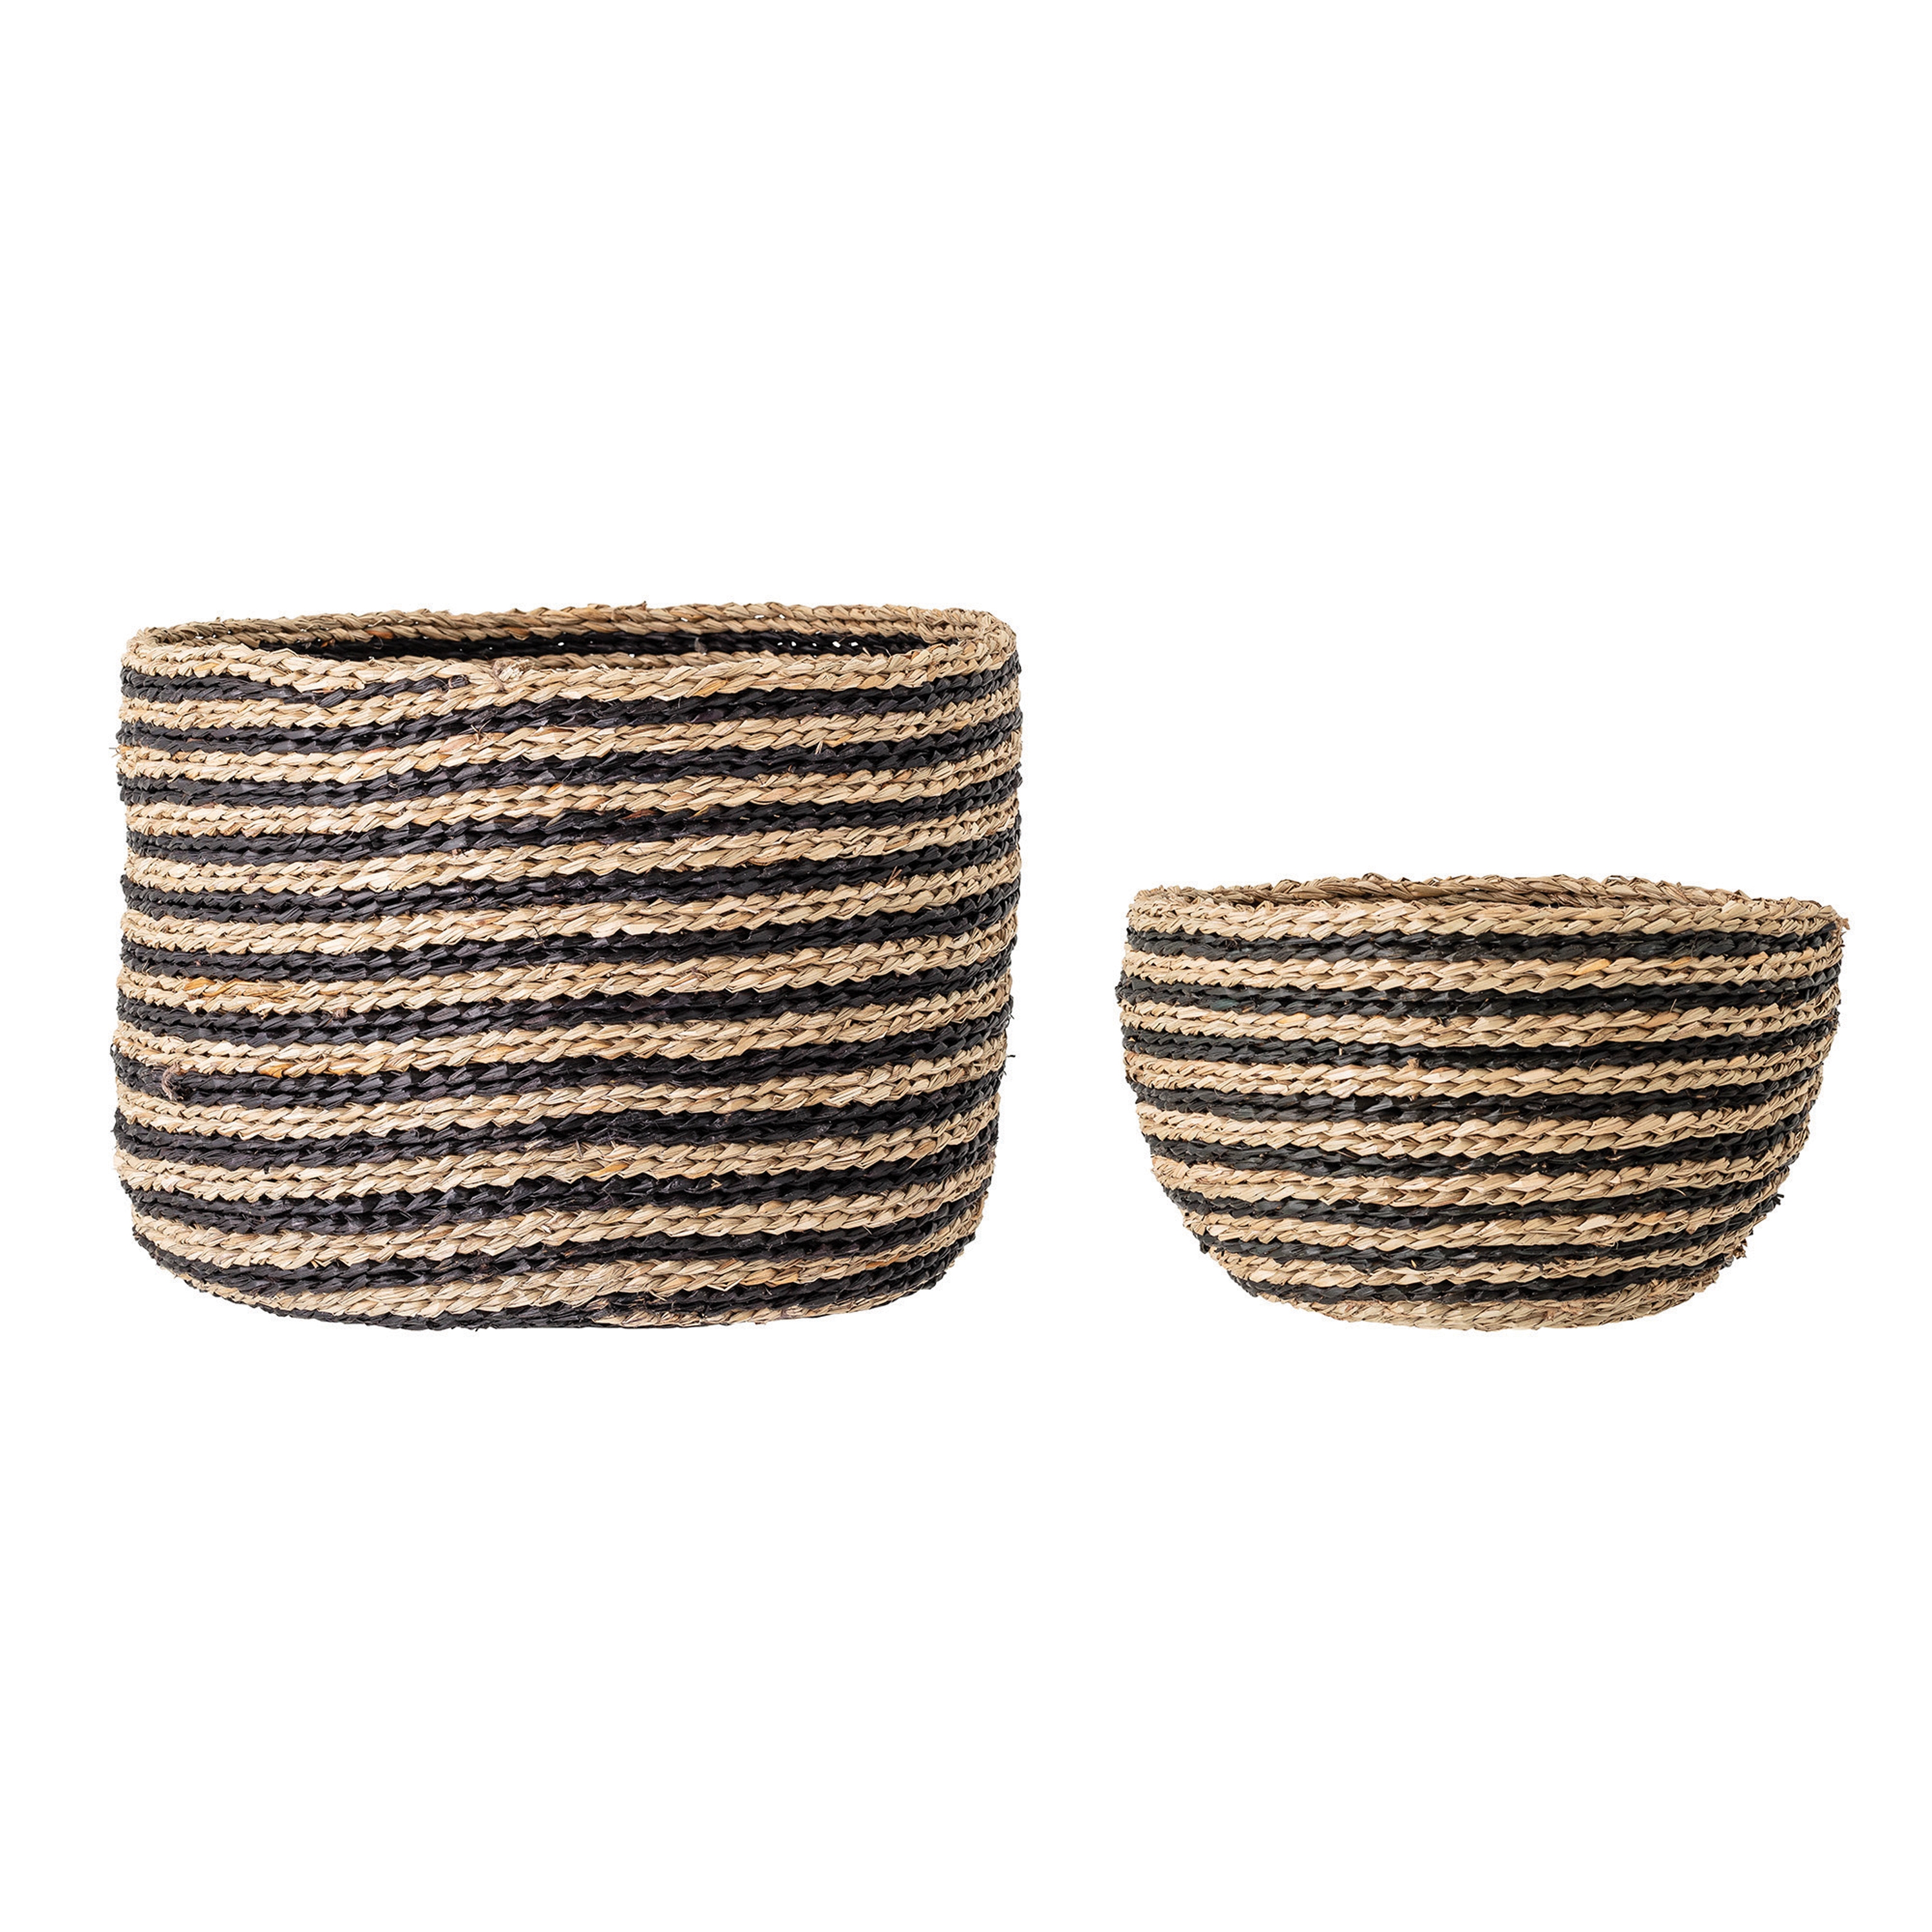 Handwoven Striped Seagrass Baskets (Set of 2 Sizes) - Image 0